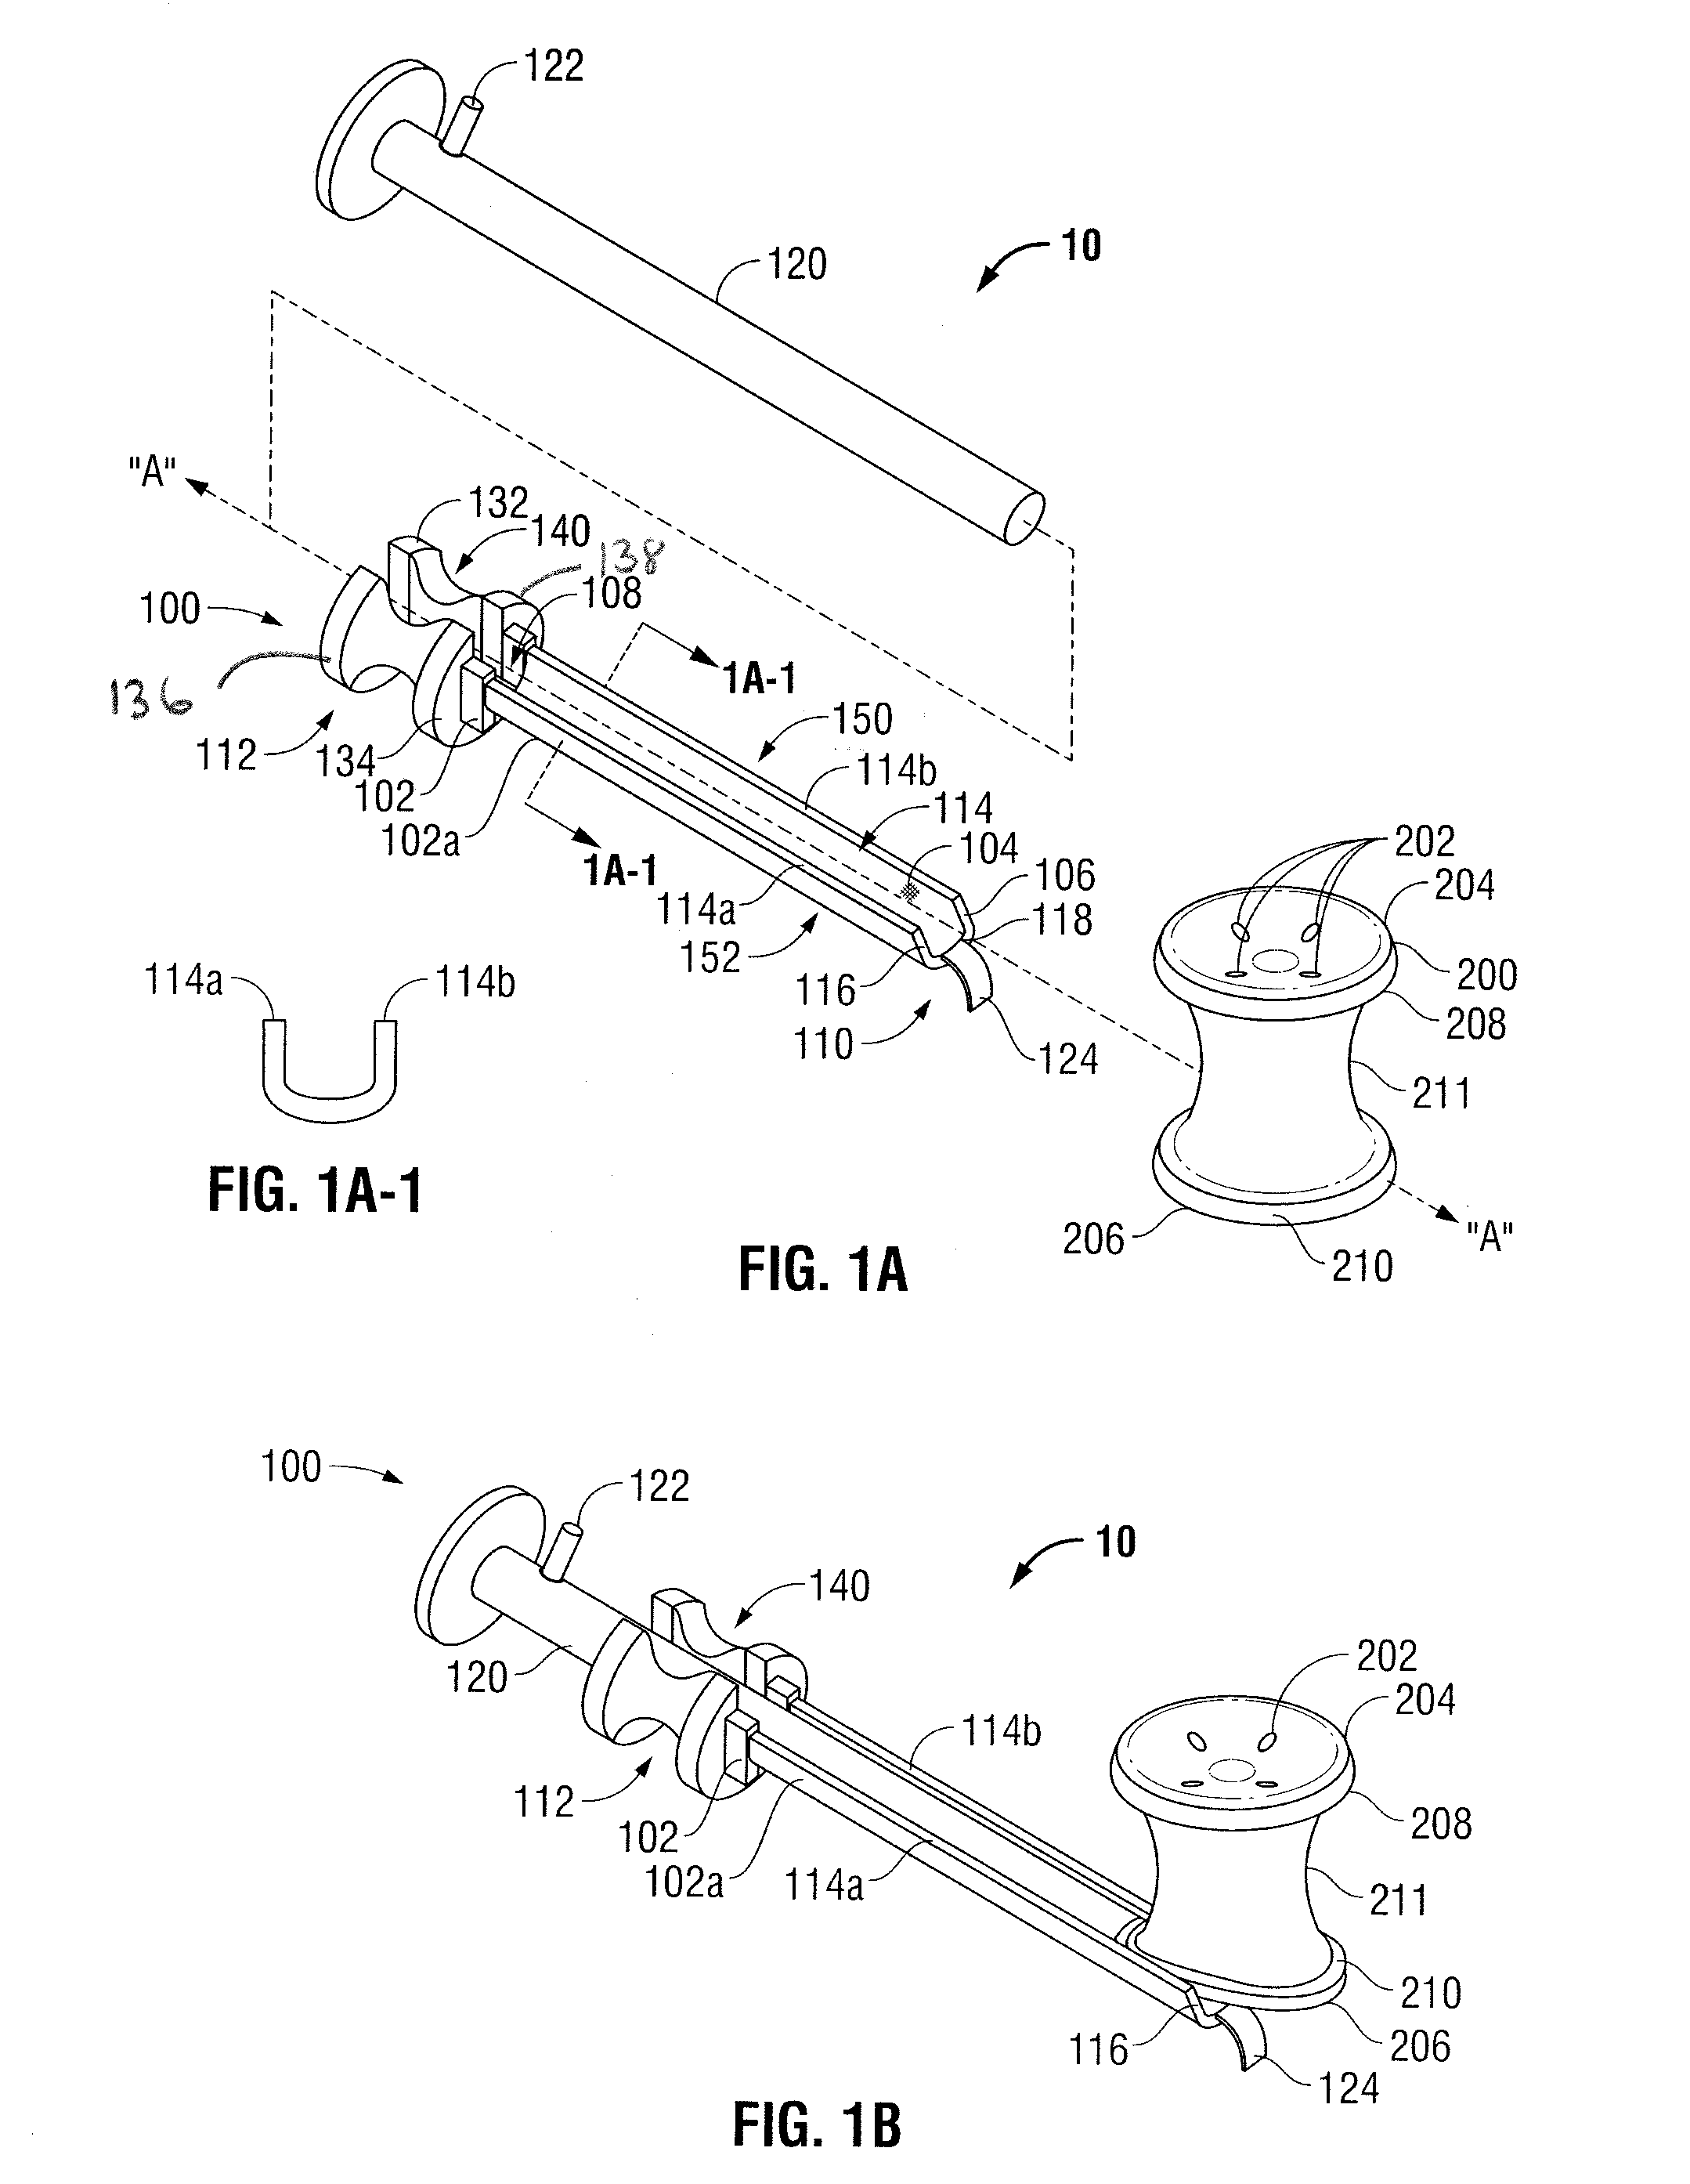 Surgical introducer and access port assembly